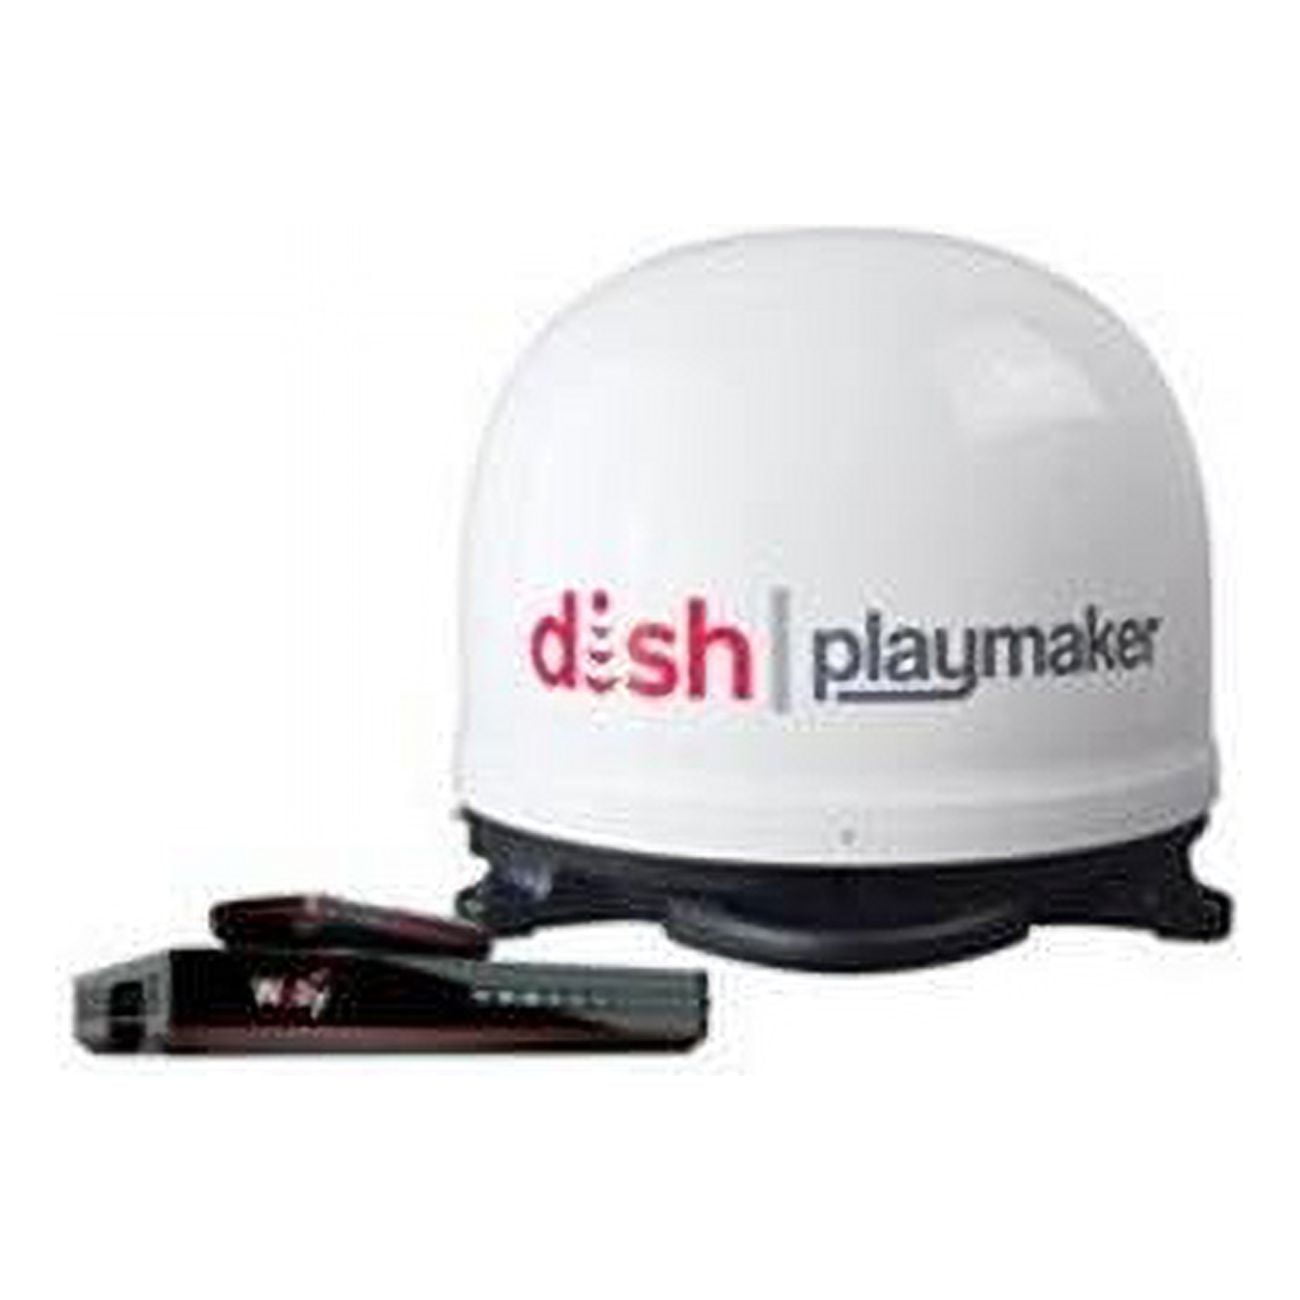 Winegard PL70MTR PlayMaker Dish Antenna with Receiver & Window Mount Bundle -  Winegard Company